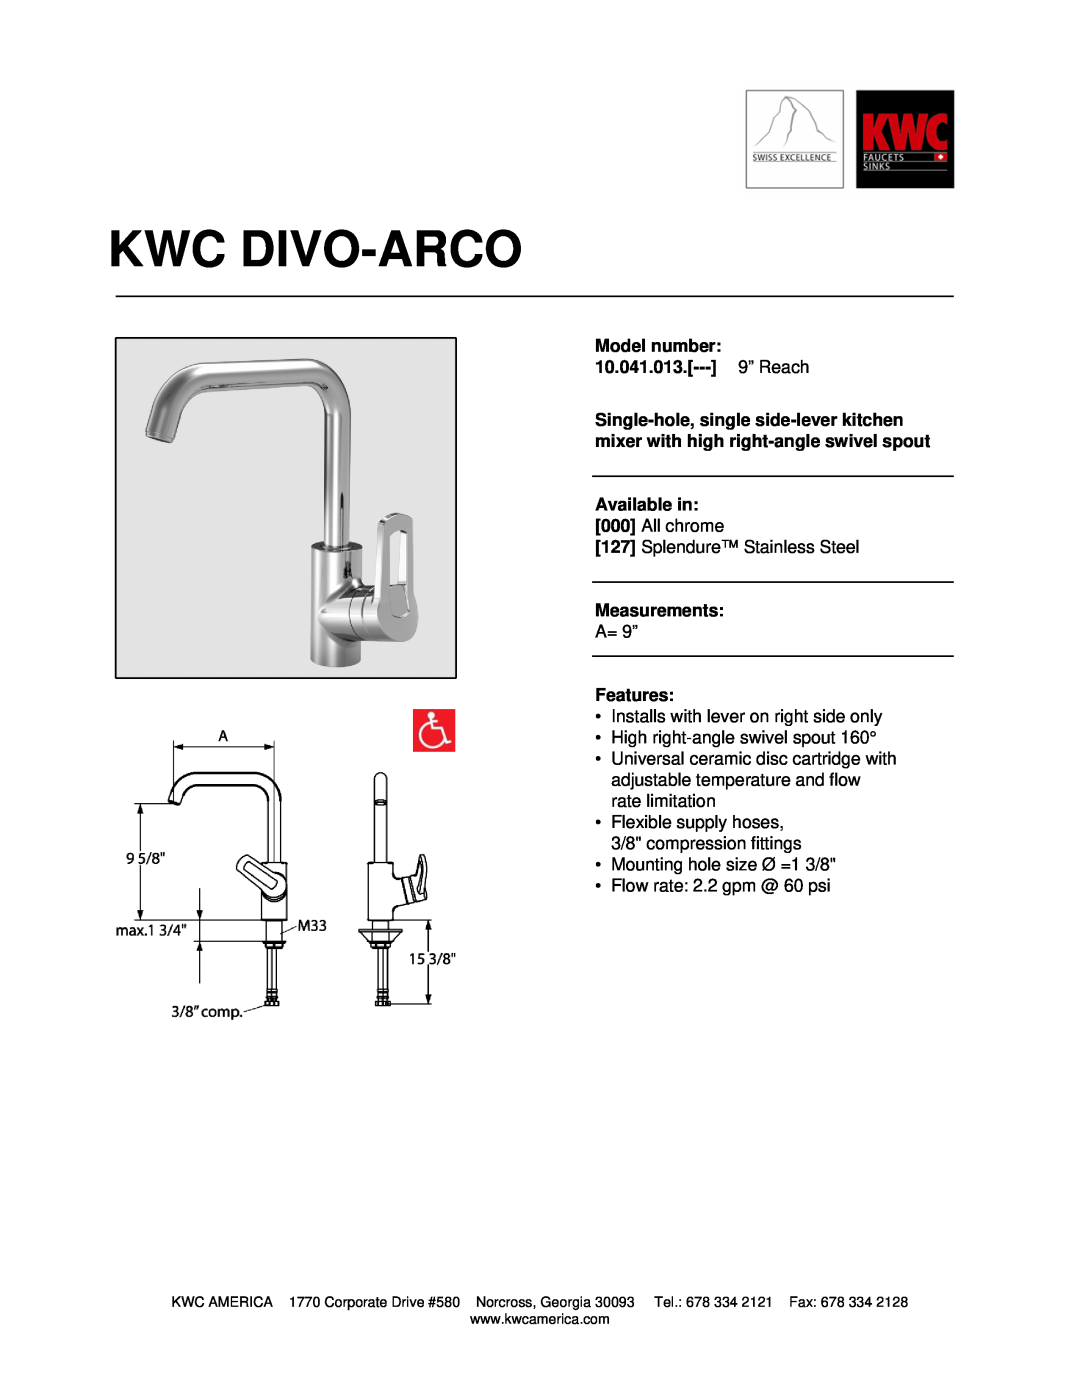 KWC manual Kwc Divo-Arco, Model number 10.041.013.--- 9” Reach, Available in, Measurements, Features 